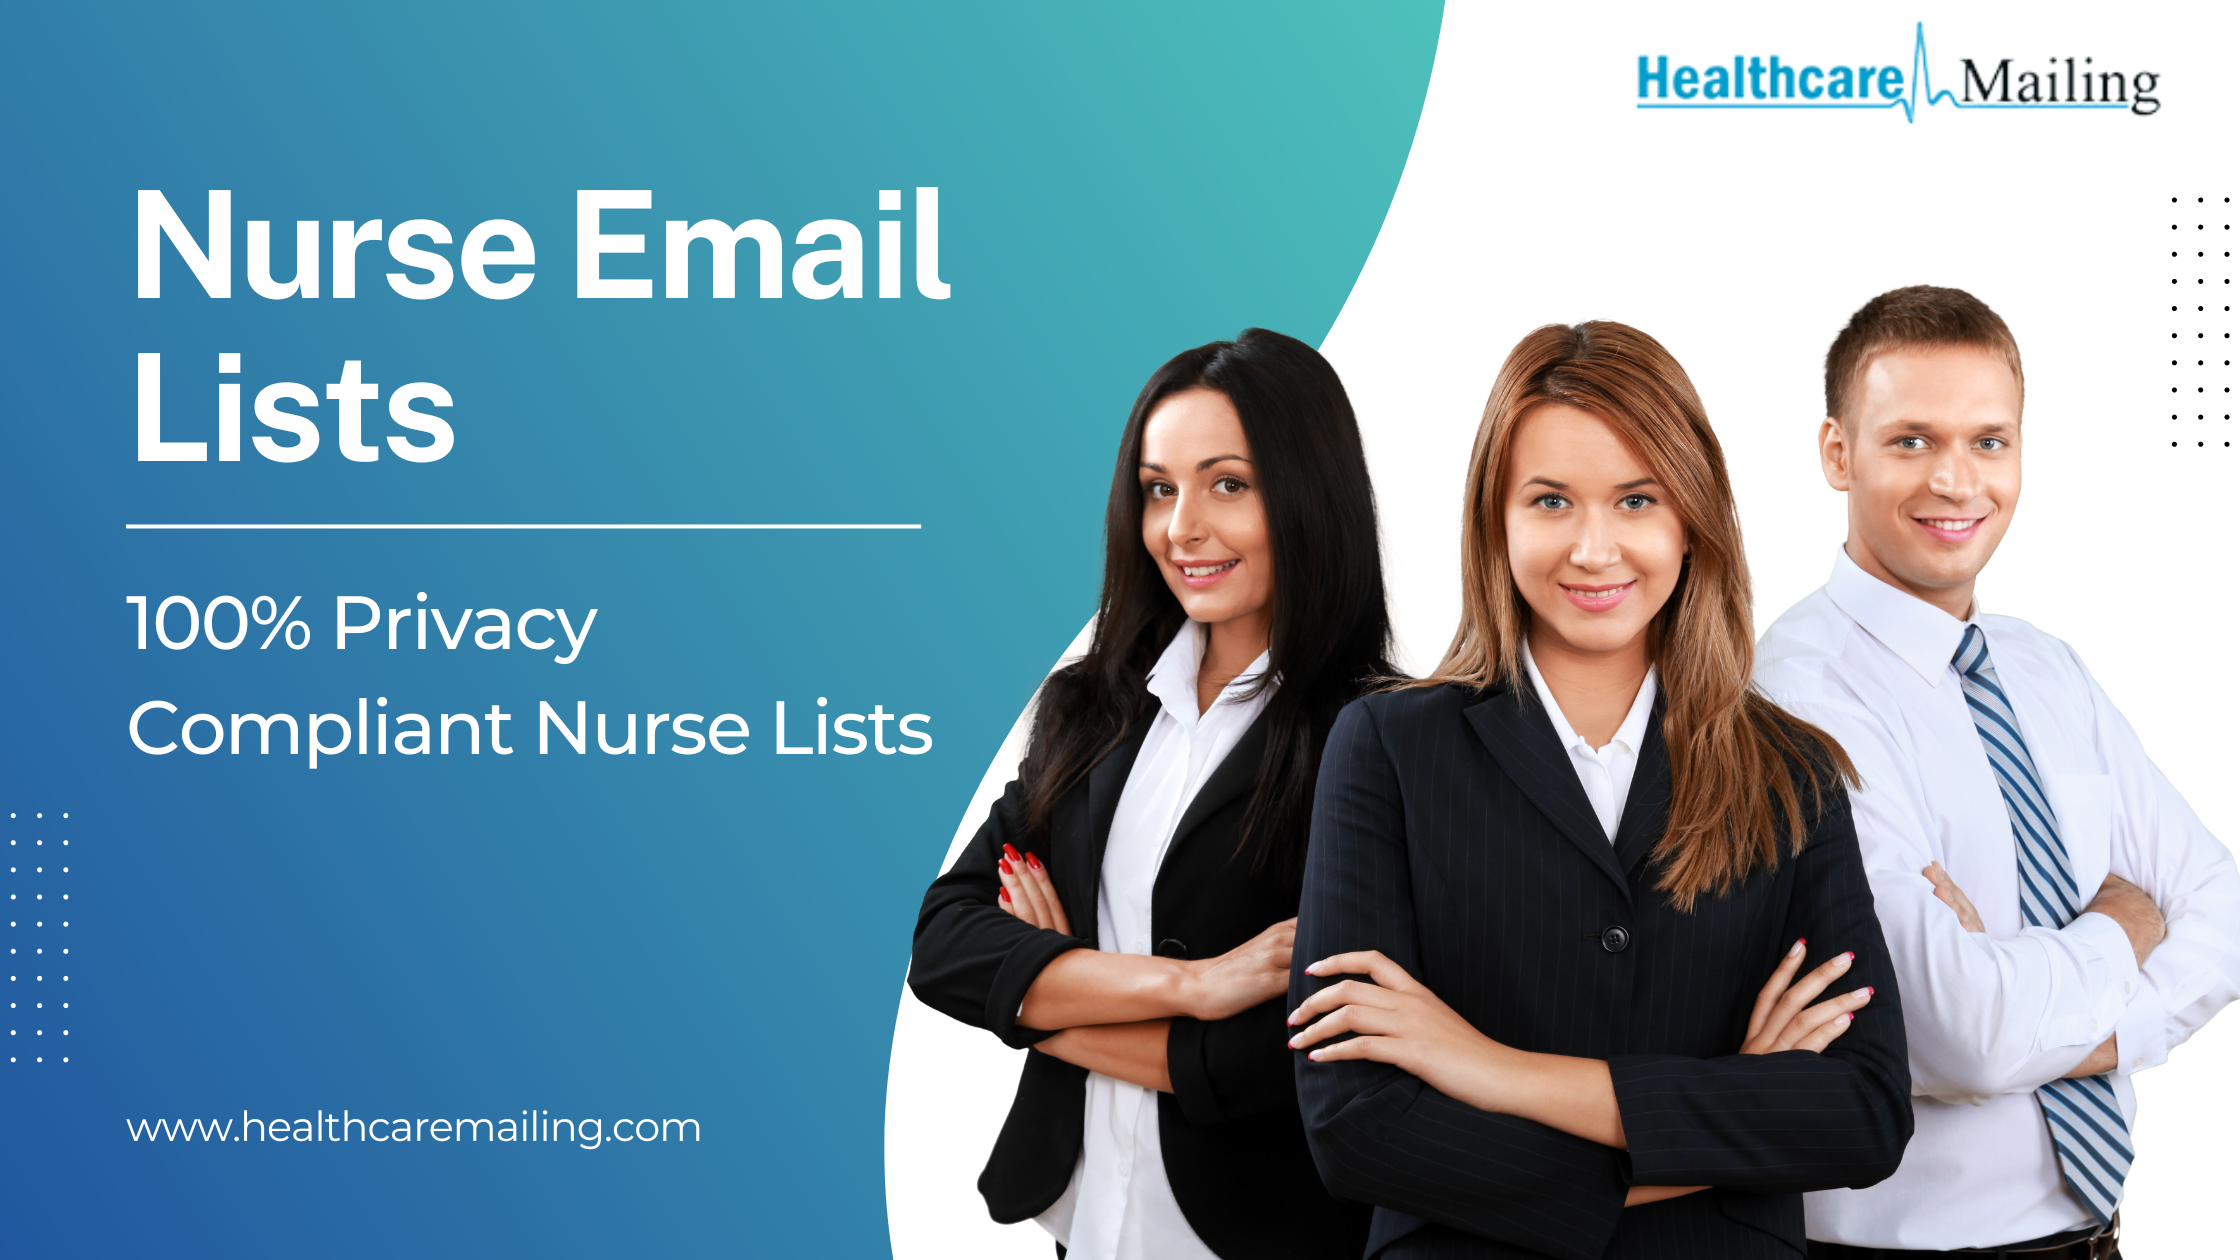 How to Increase Sales and Business ROI with Our Nurse Email List?